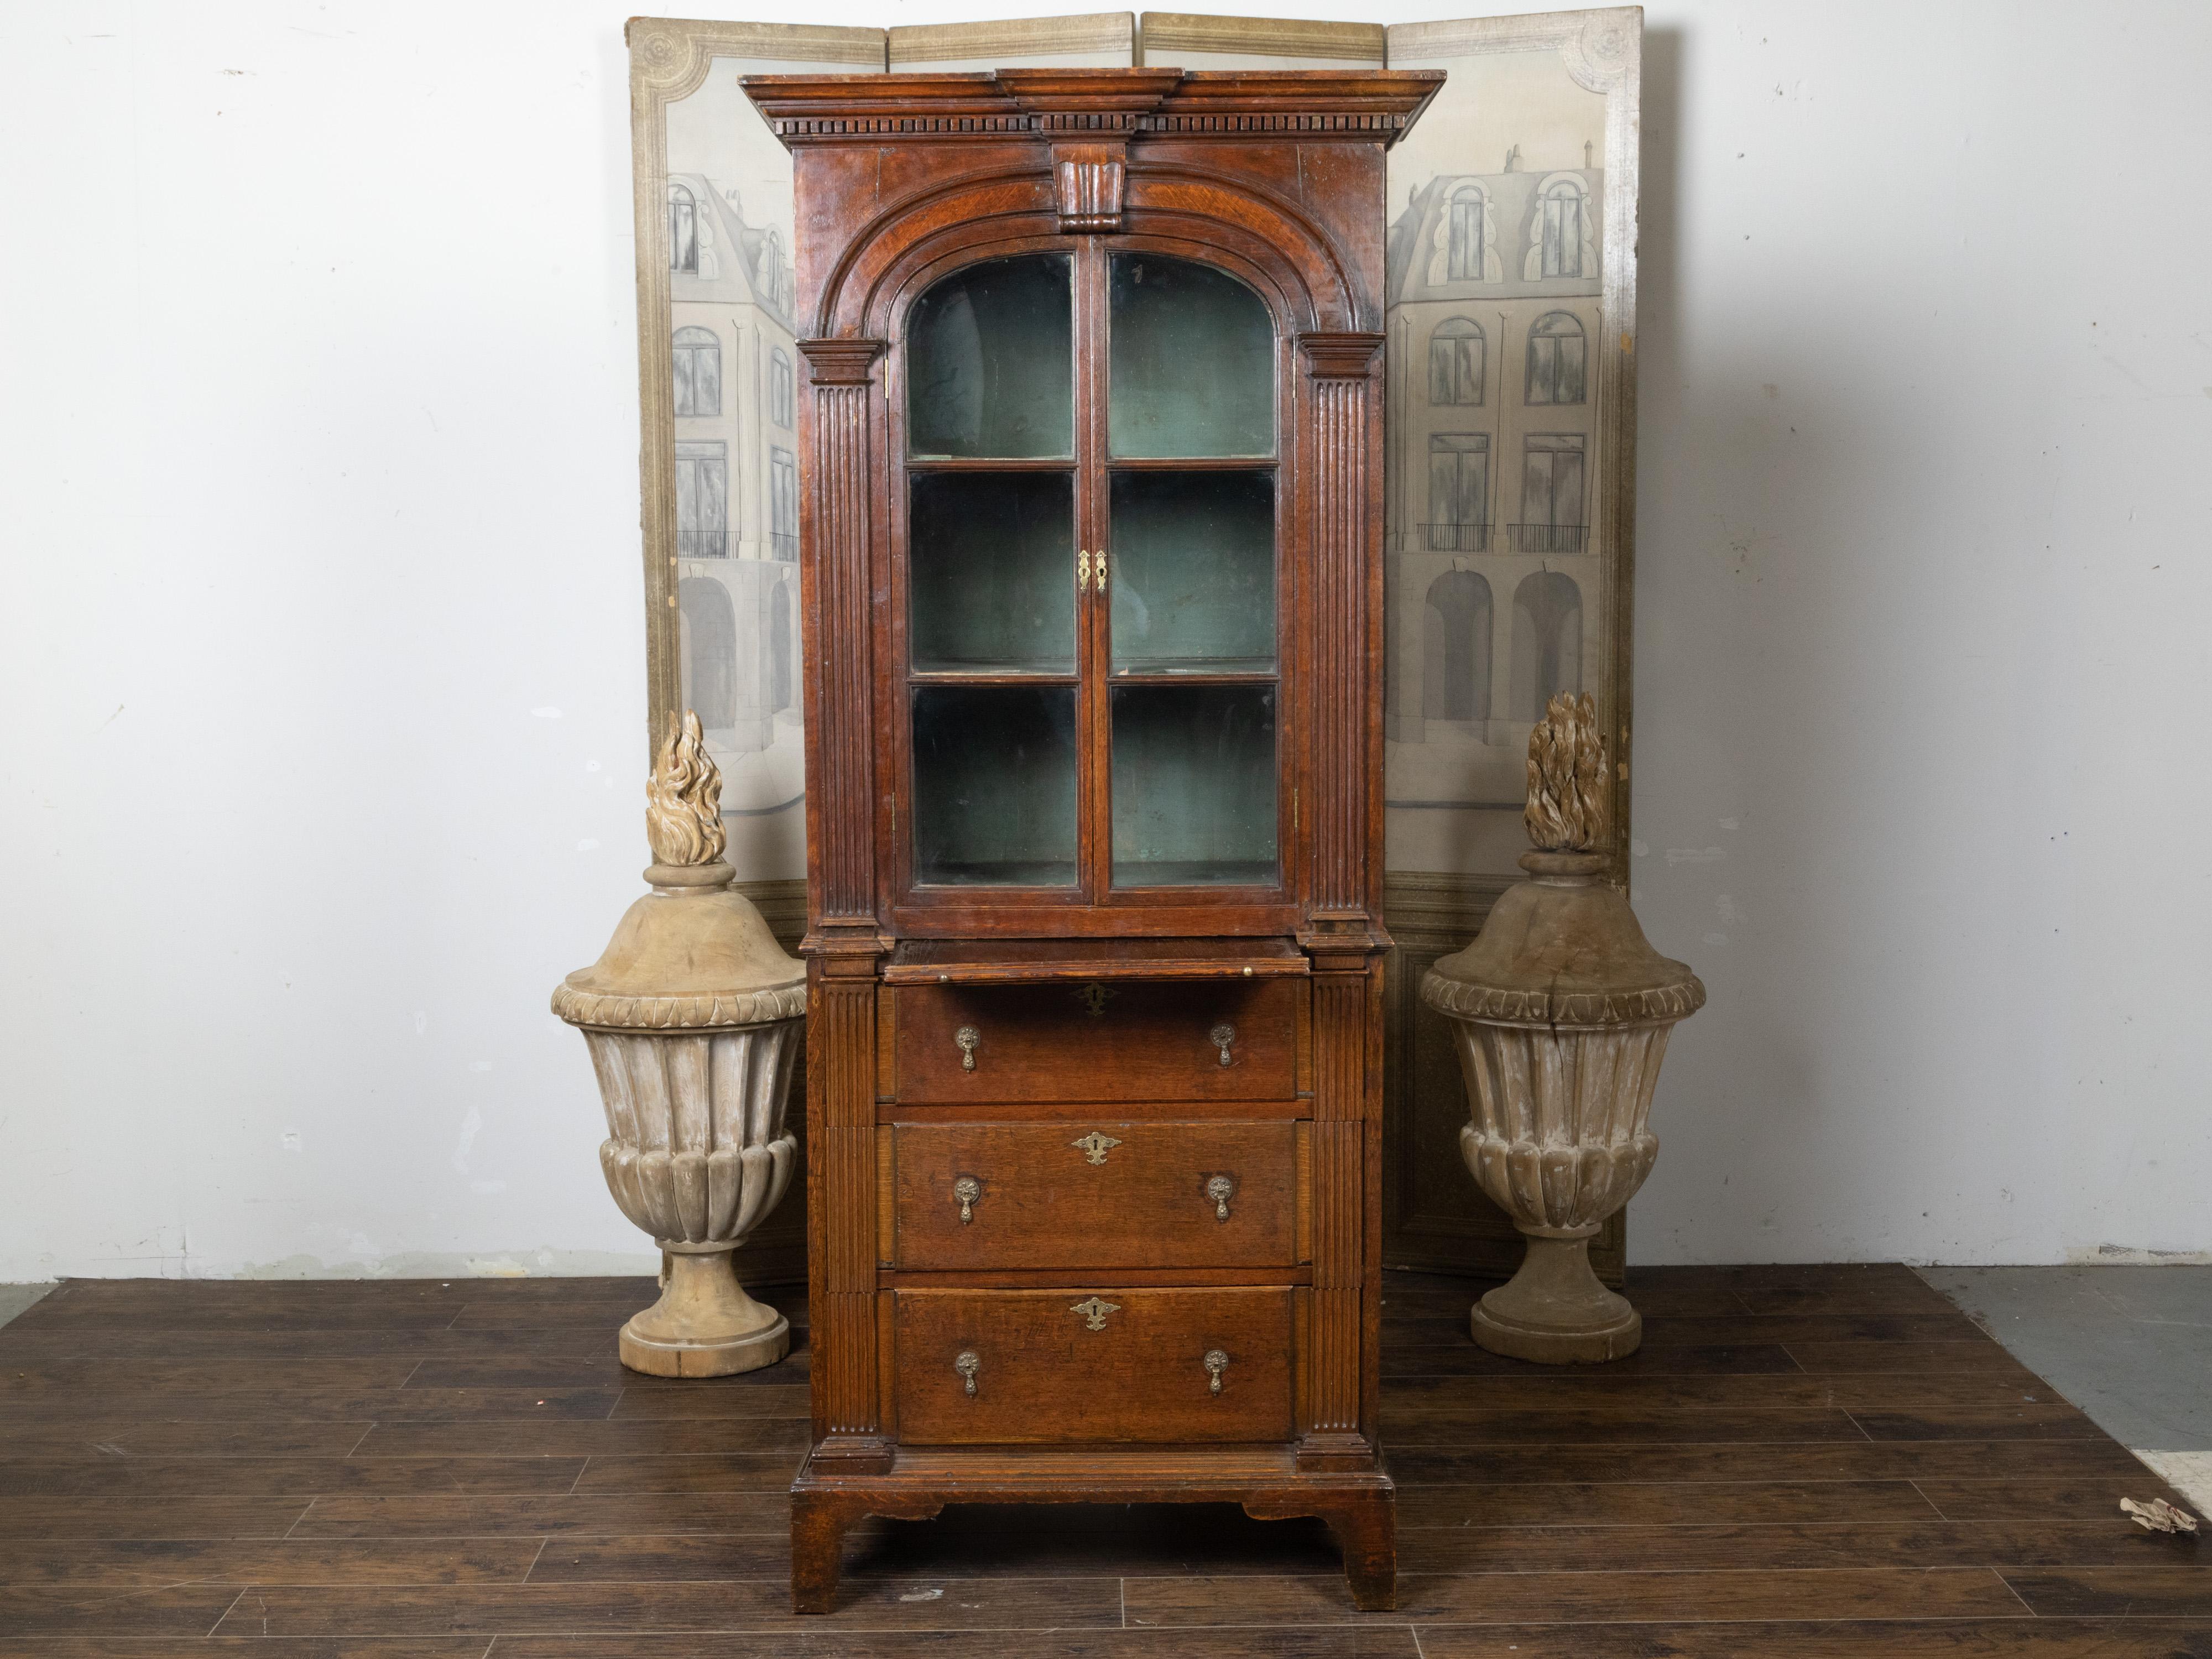 An English oak bookcase from the 19th century, with carved cornice, glass doors, three drawers and pilaster motifs. Created in England during the 19th century, this oak bookcase features a molded cornice with protruding center and dentil molding,